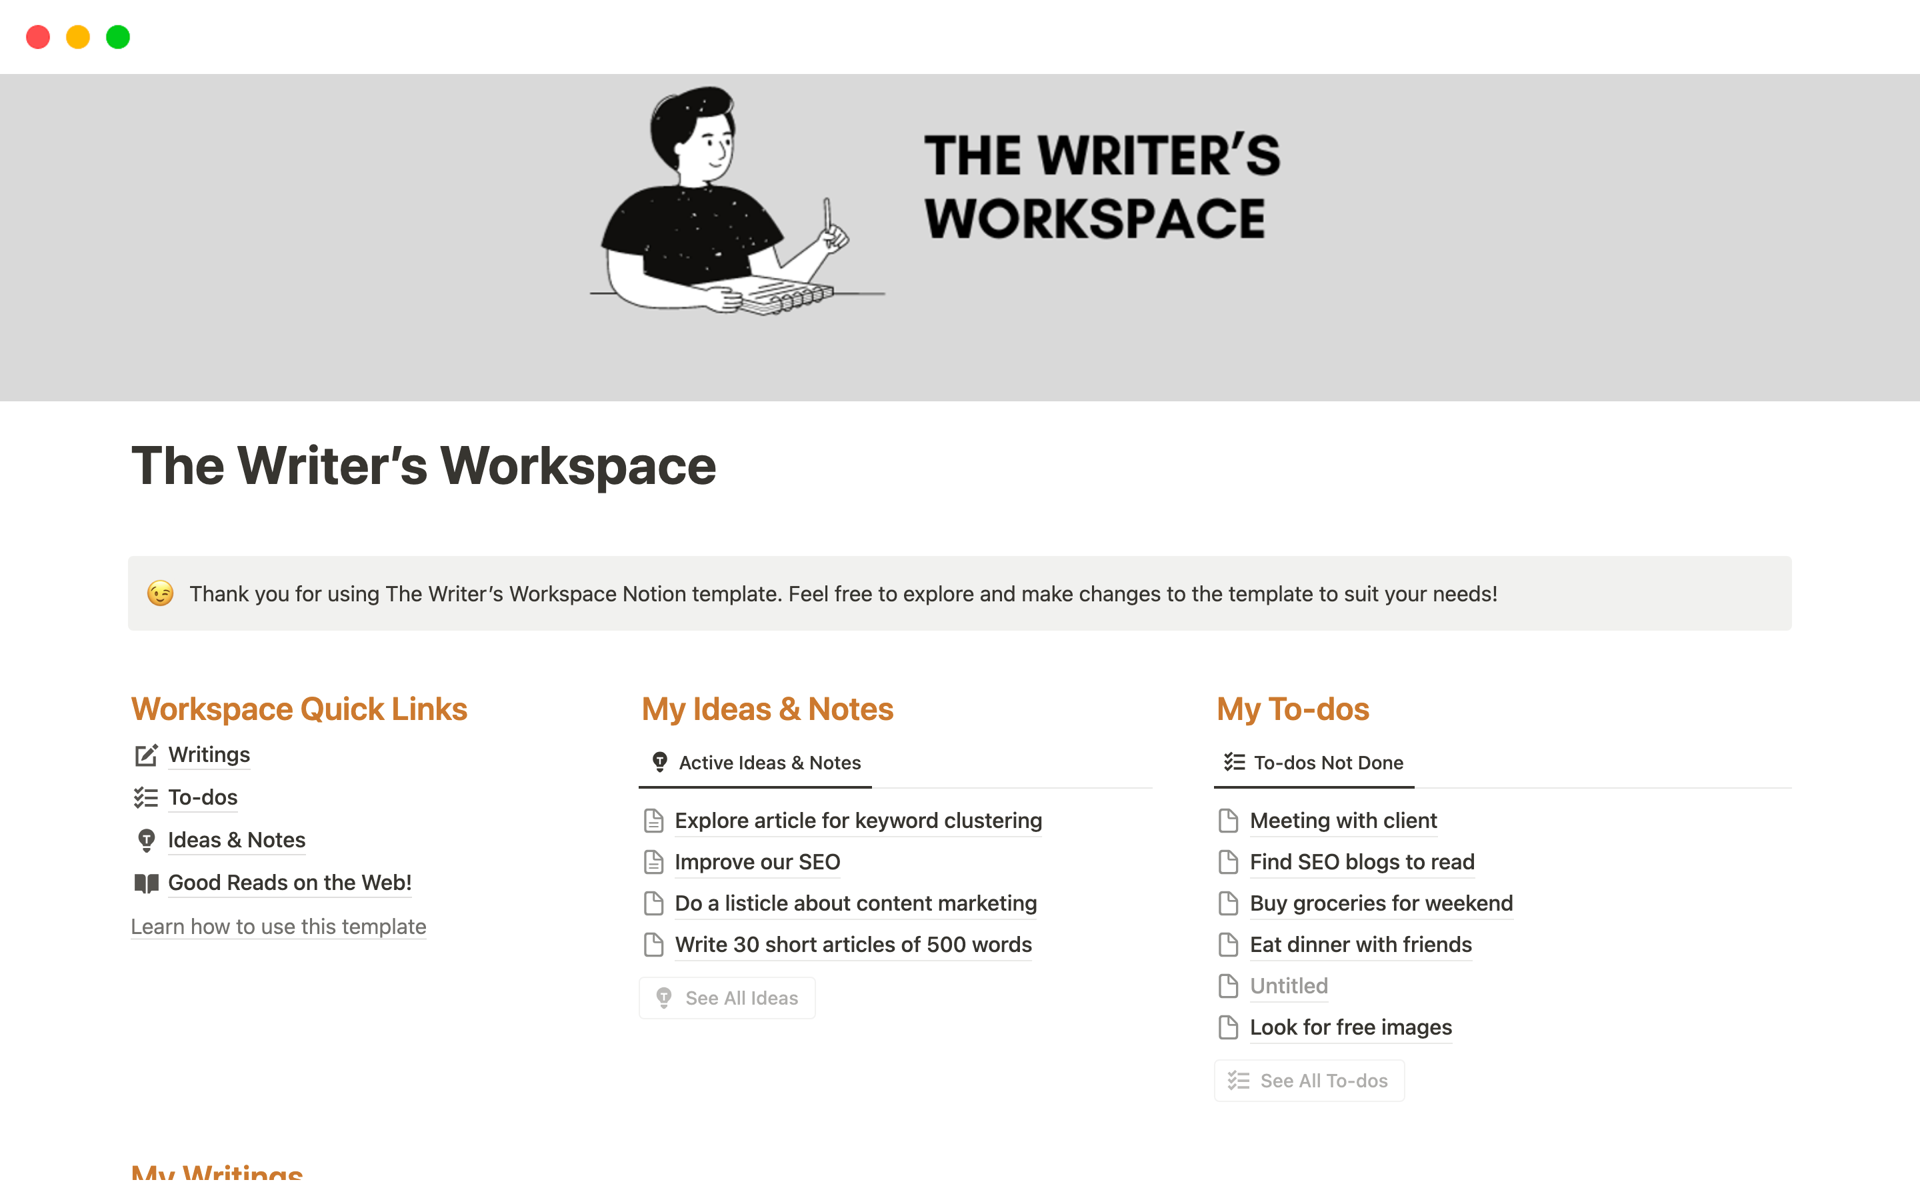 Track the progress of your content writing work, organize your reading library, to-do and notes, all in one place.